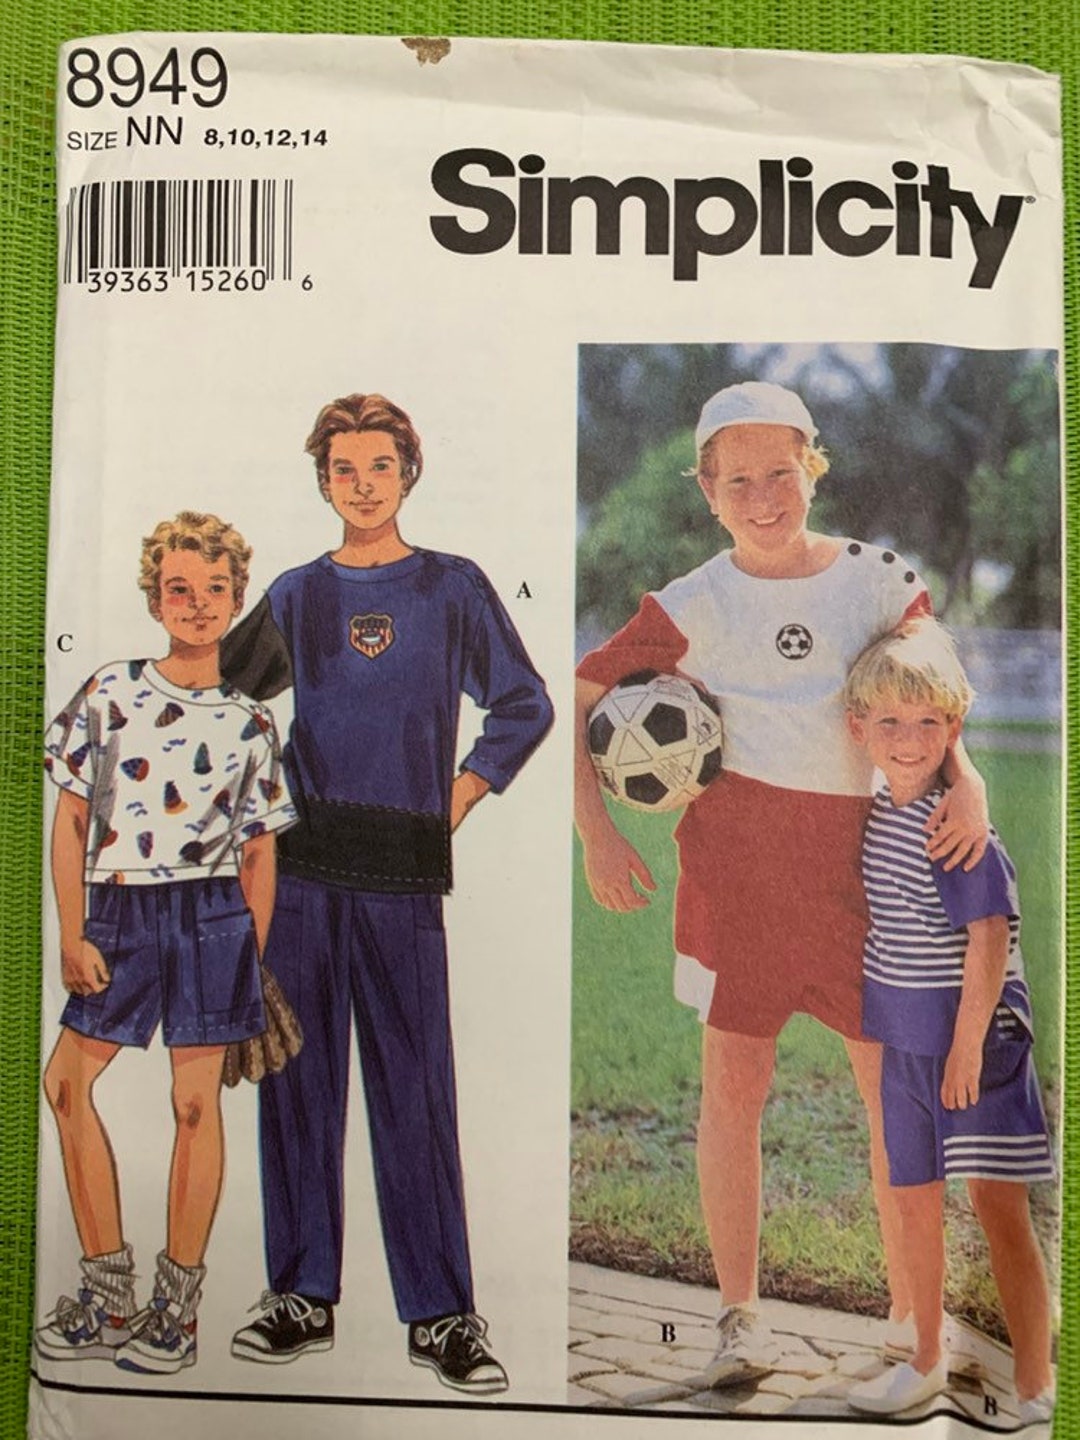 Simplicity Sewing Pattern S8949 Misses' Blouses 8949 - Patterns